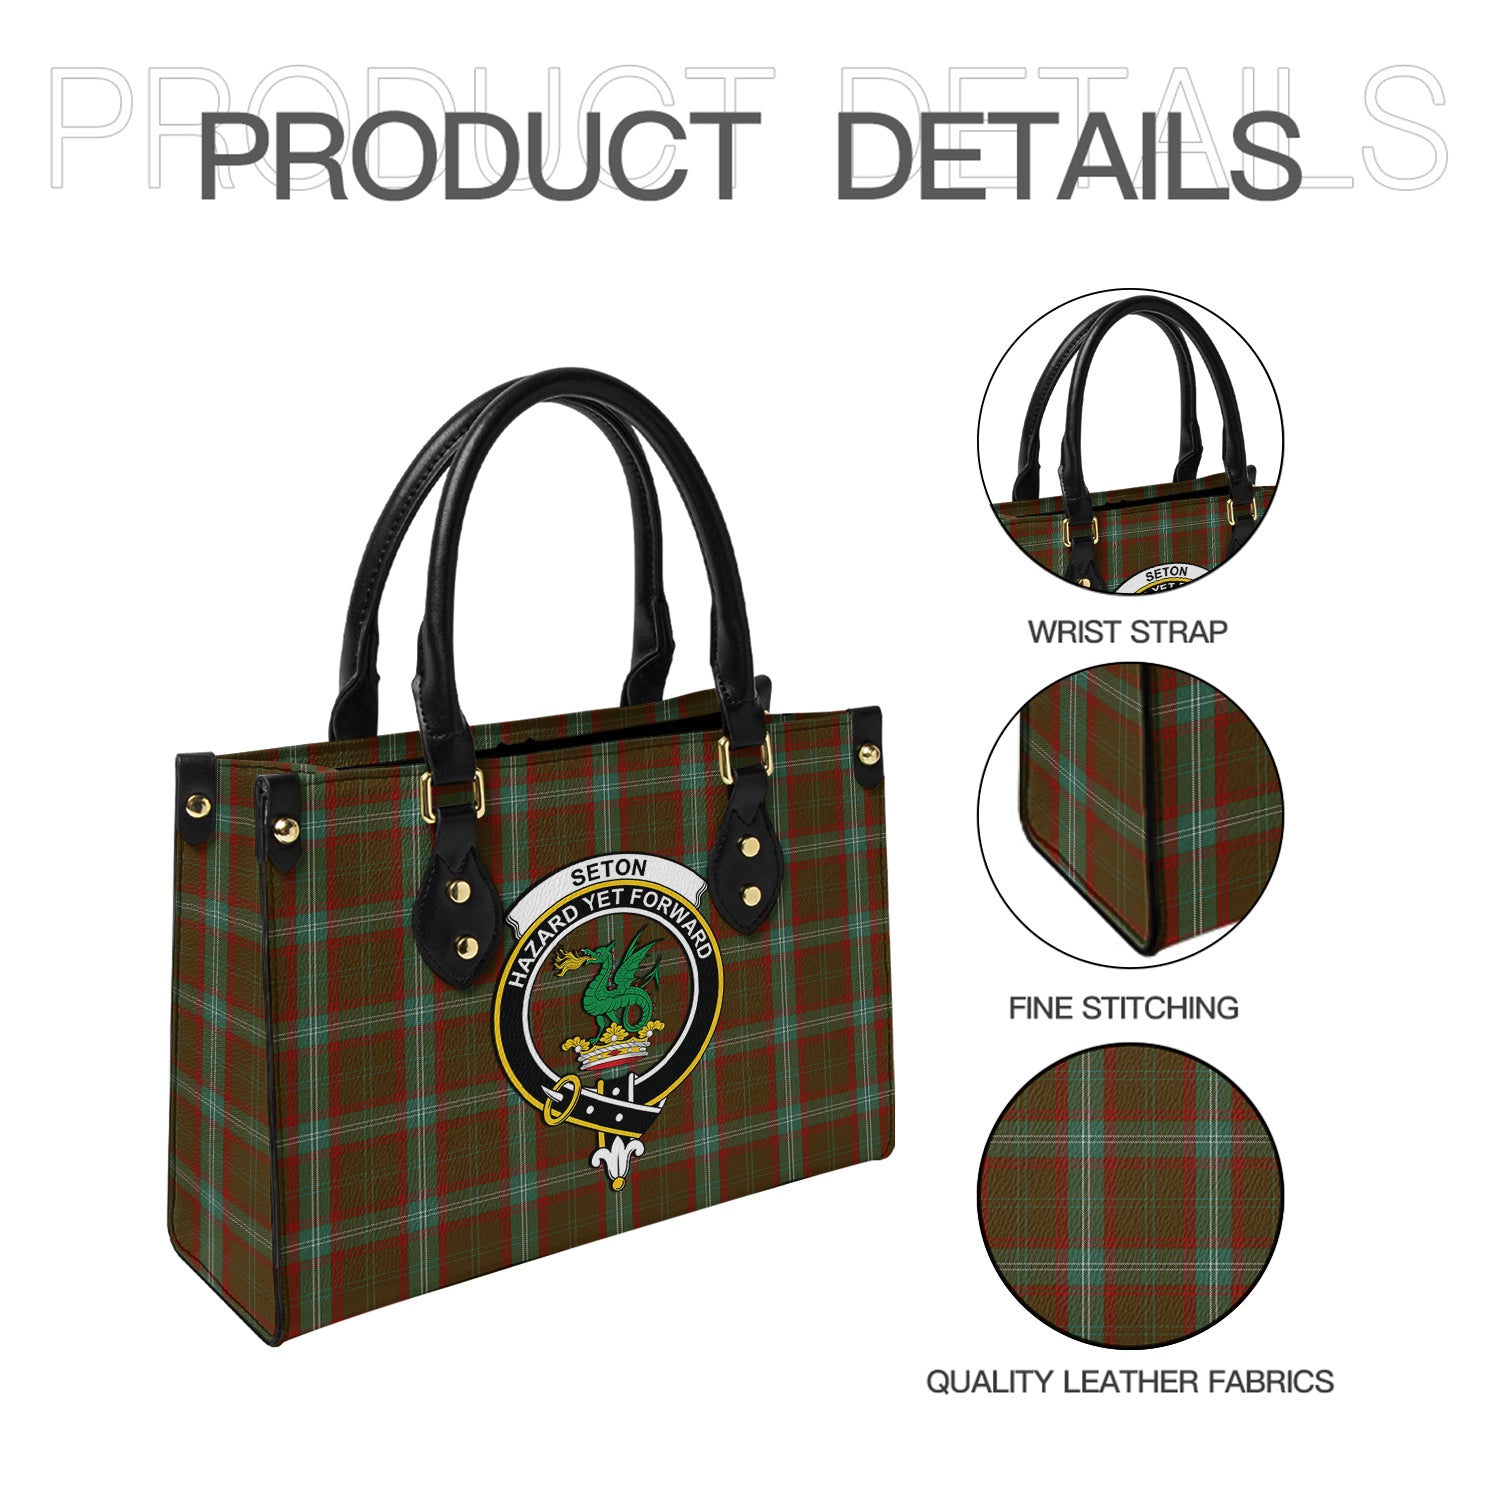 seton-hunting-tartan-leather-bag-with-family-crest